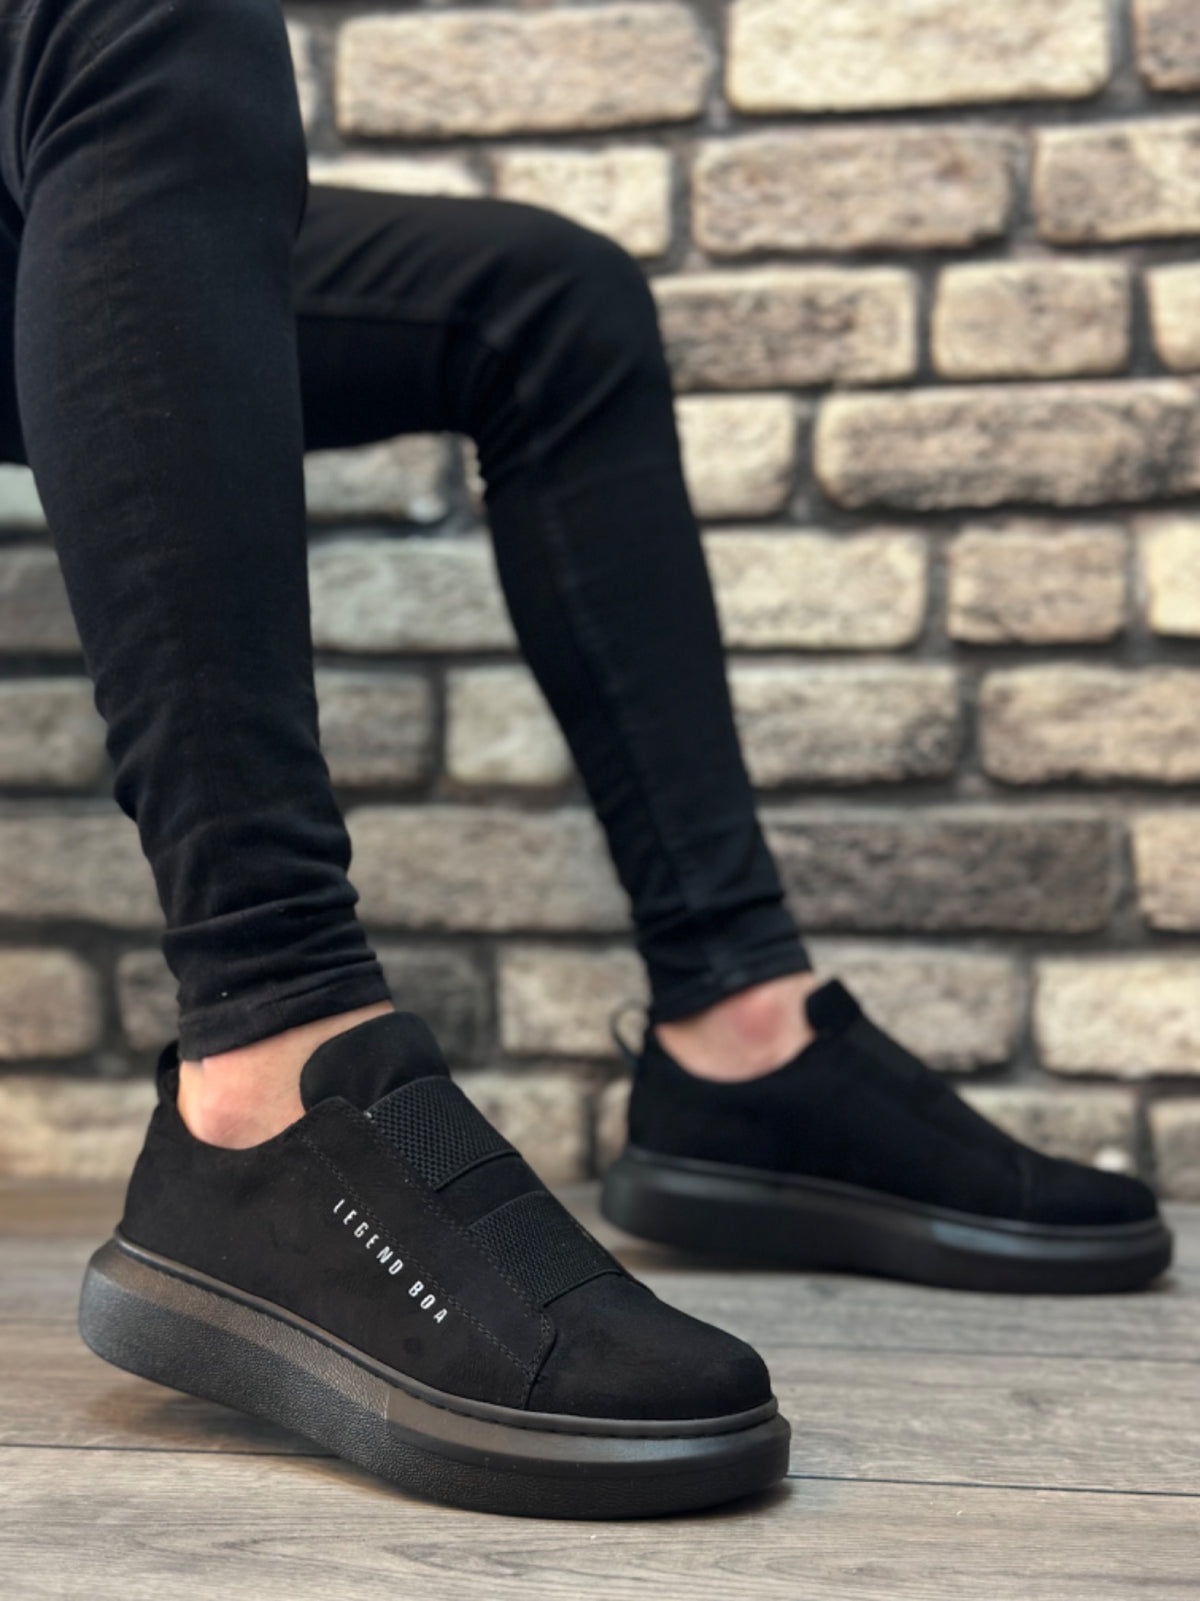 BA0307 Thick Suede High Sole Double Band Black Men's Shoes Sneakers - STREET MODE ™